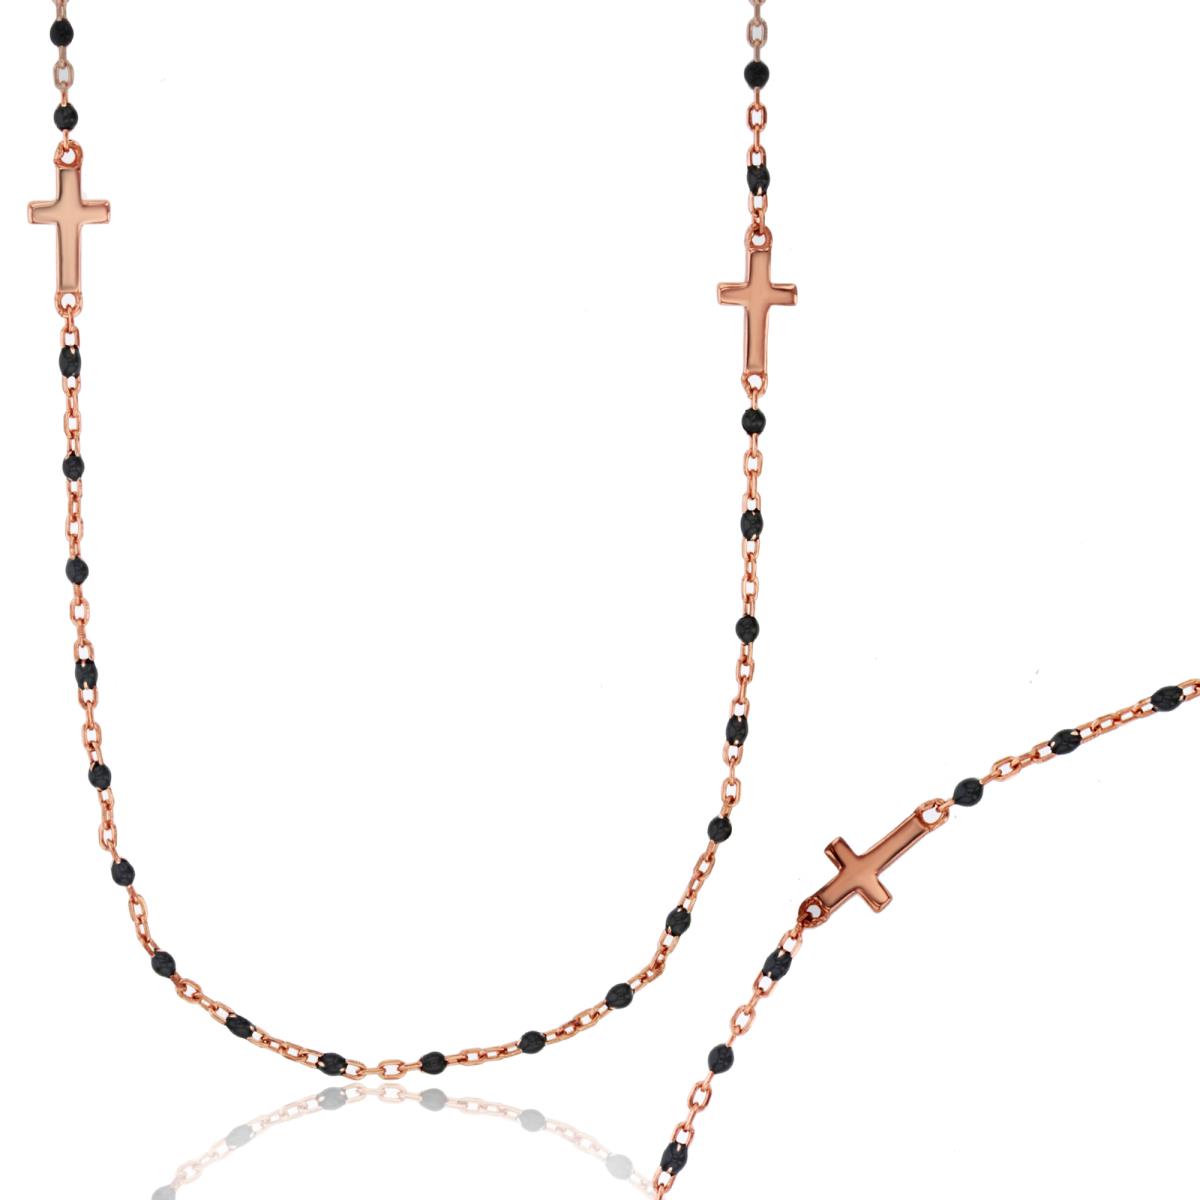 Sterling Silver Rose 10x5mm  Black 10x5mm  Enamel Beads & Crosses Chained 16"+2"Necklace